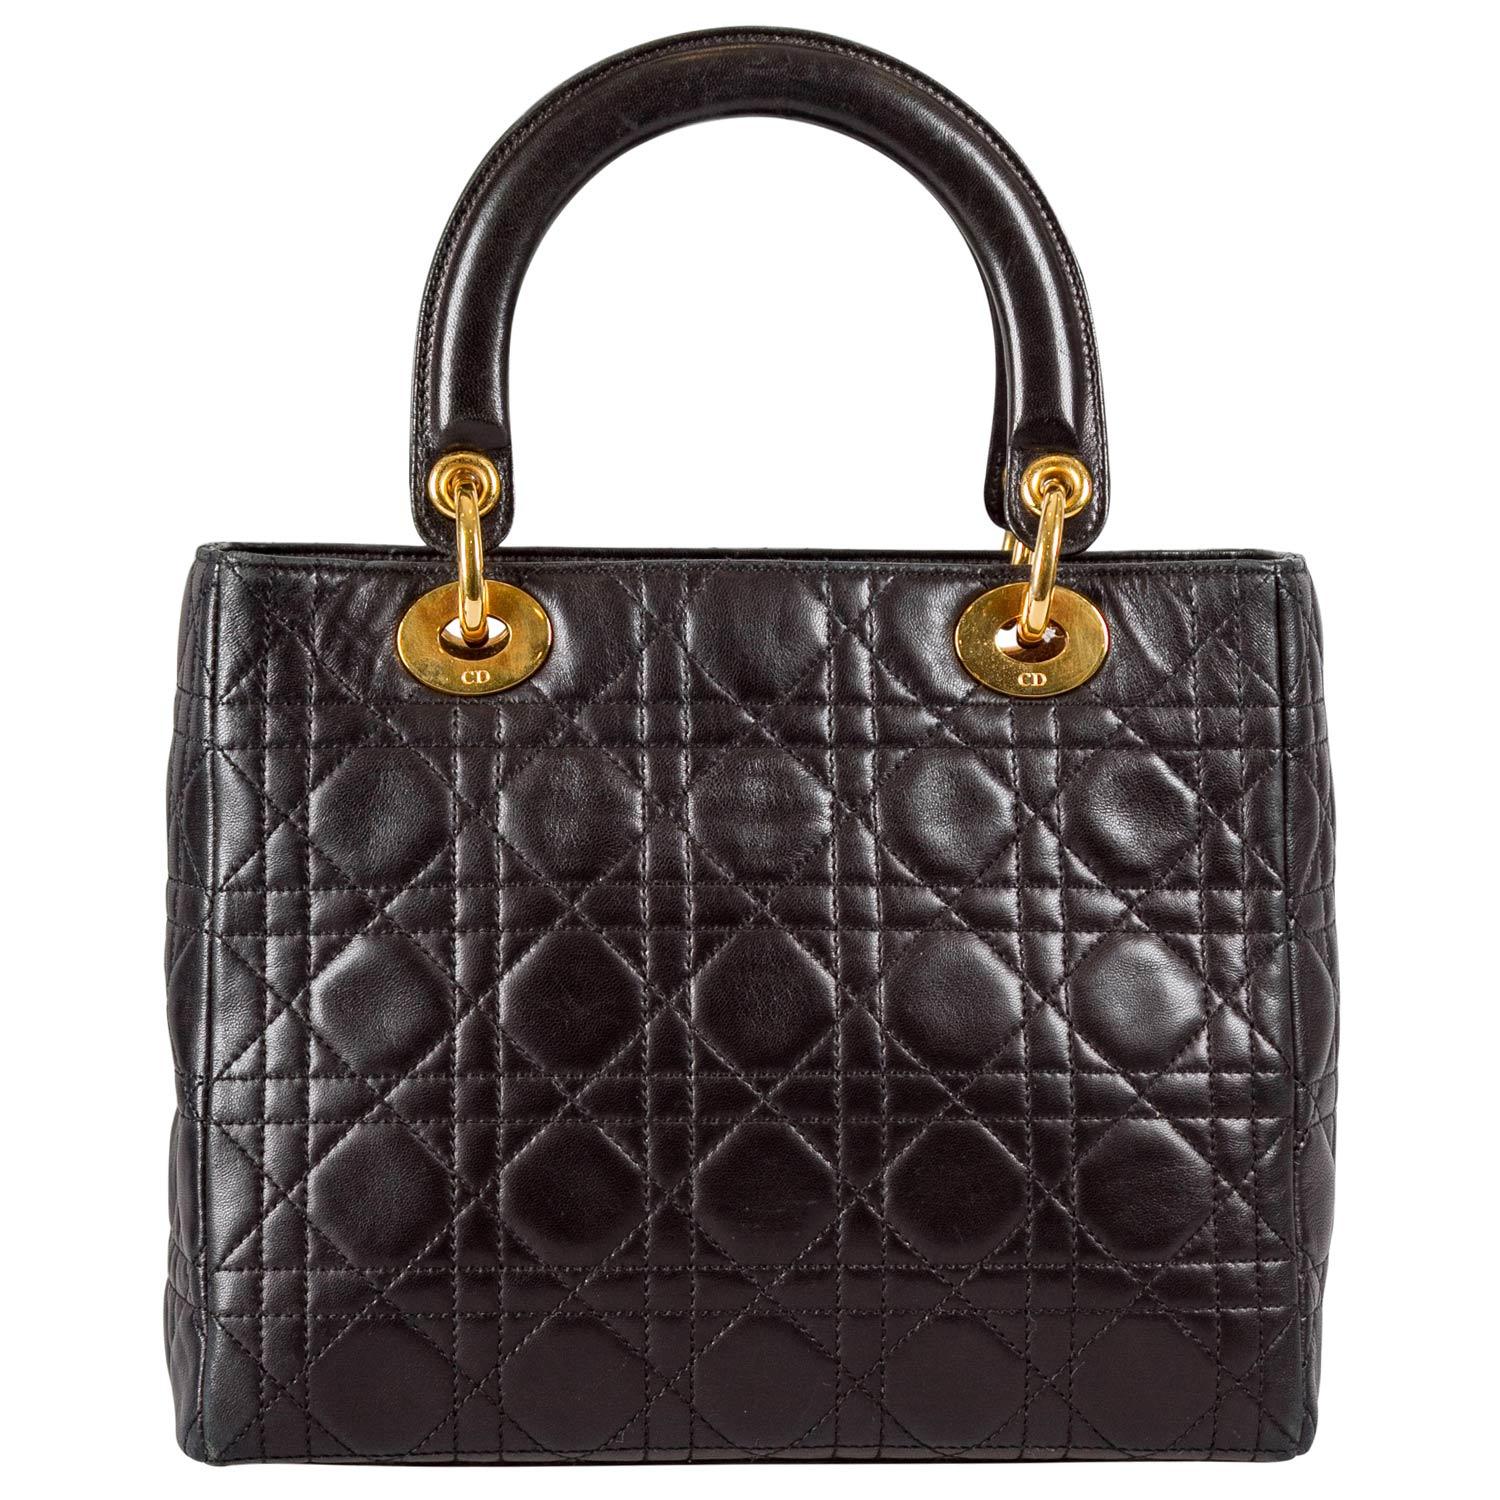 The Lady Dior tote from Dior is iconic, highly coveted, and since its birth in 1994, it has swayed us with its shape, design, and beauty. This version is a joy to witness! It comes meticulously crafted from black leather and designed with their